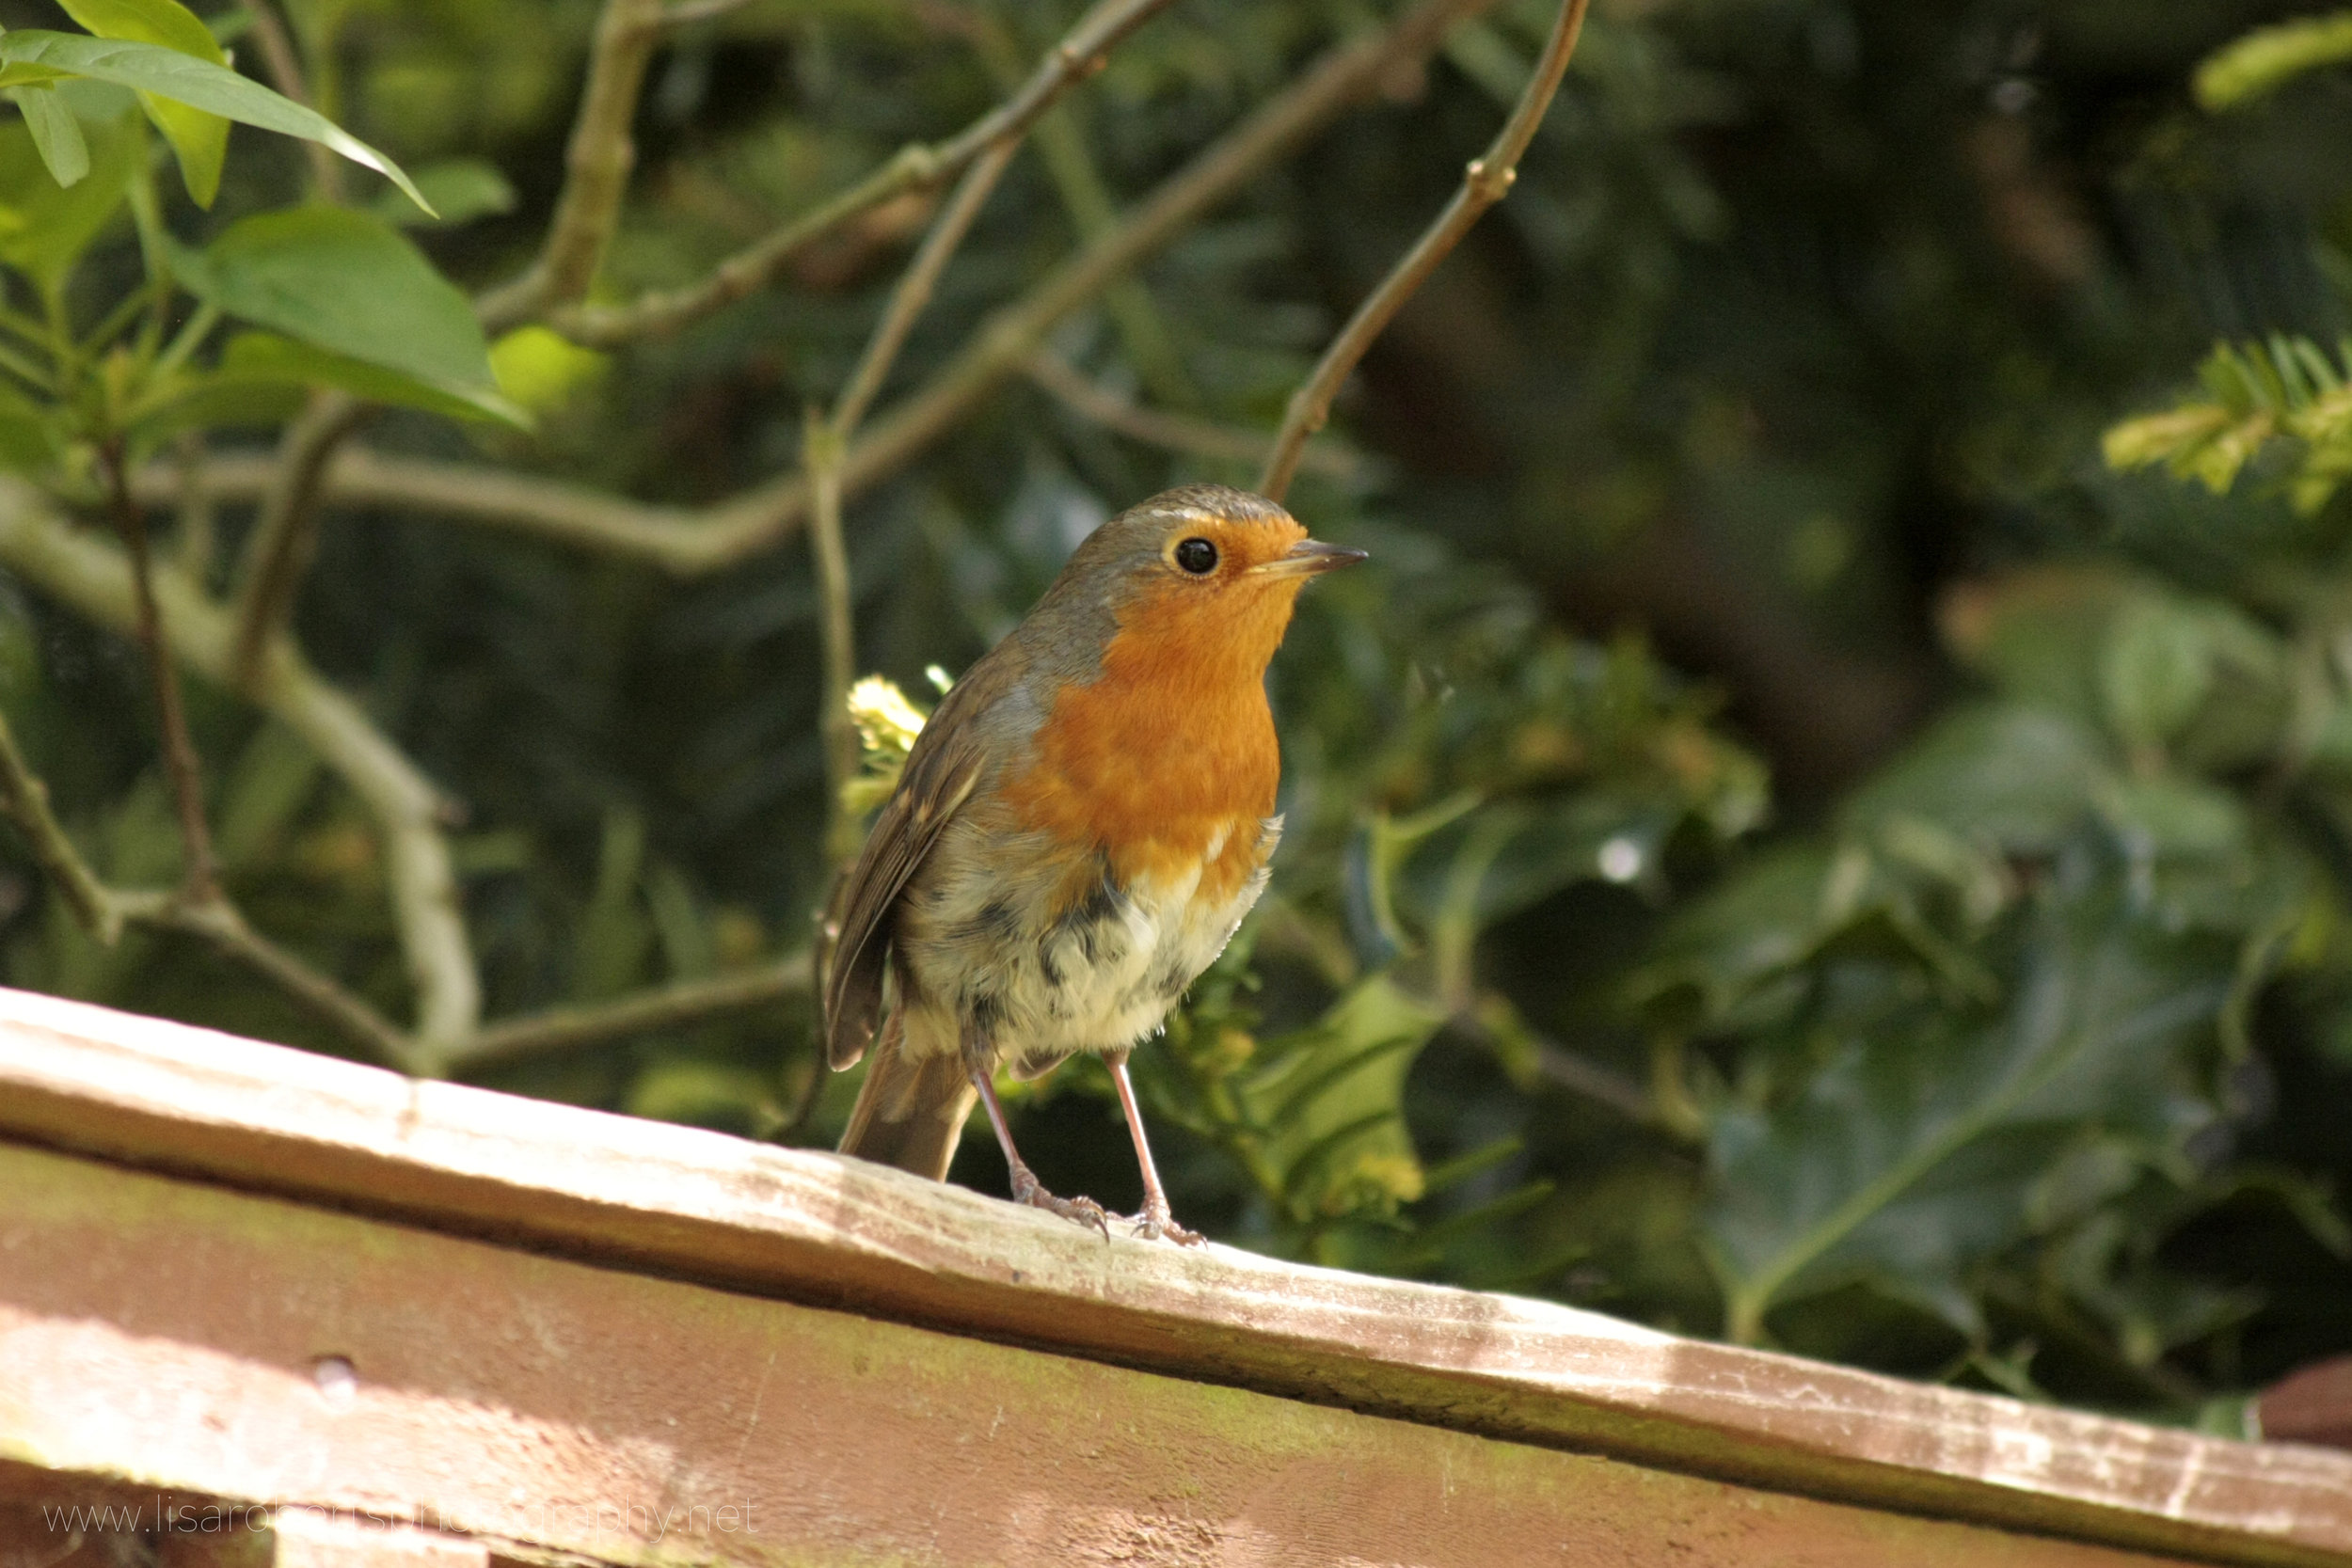  Male Robin on fence 